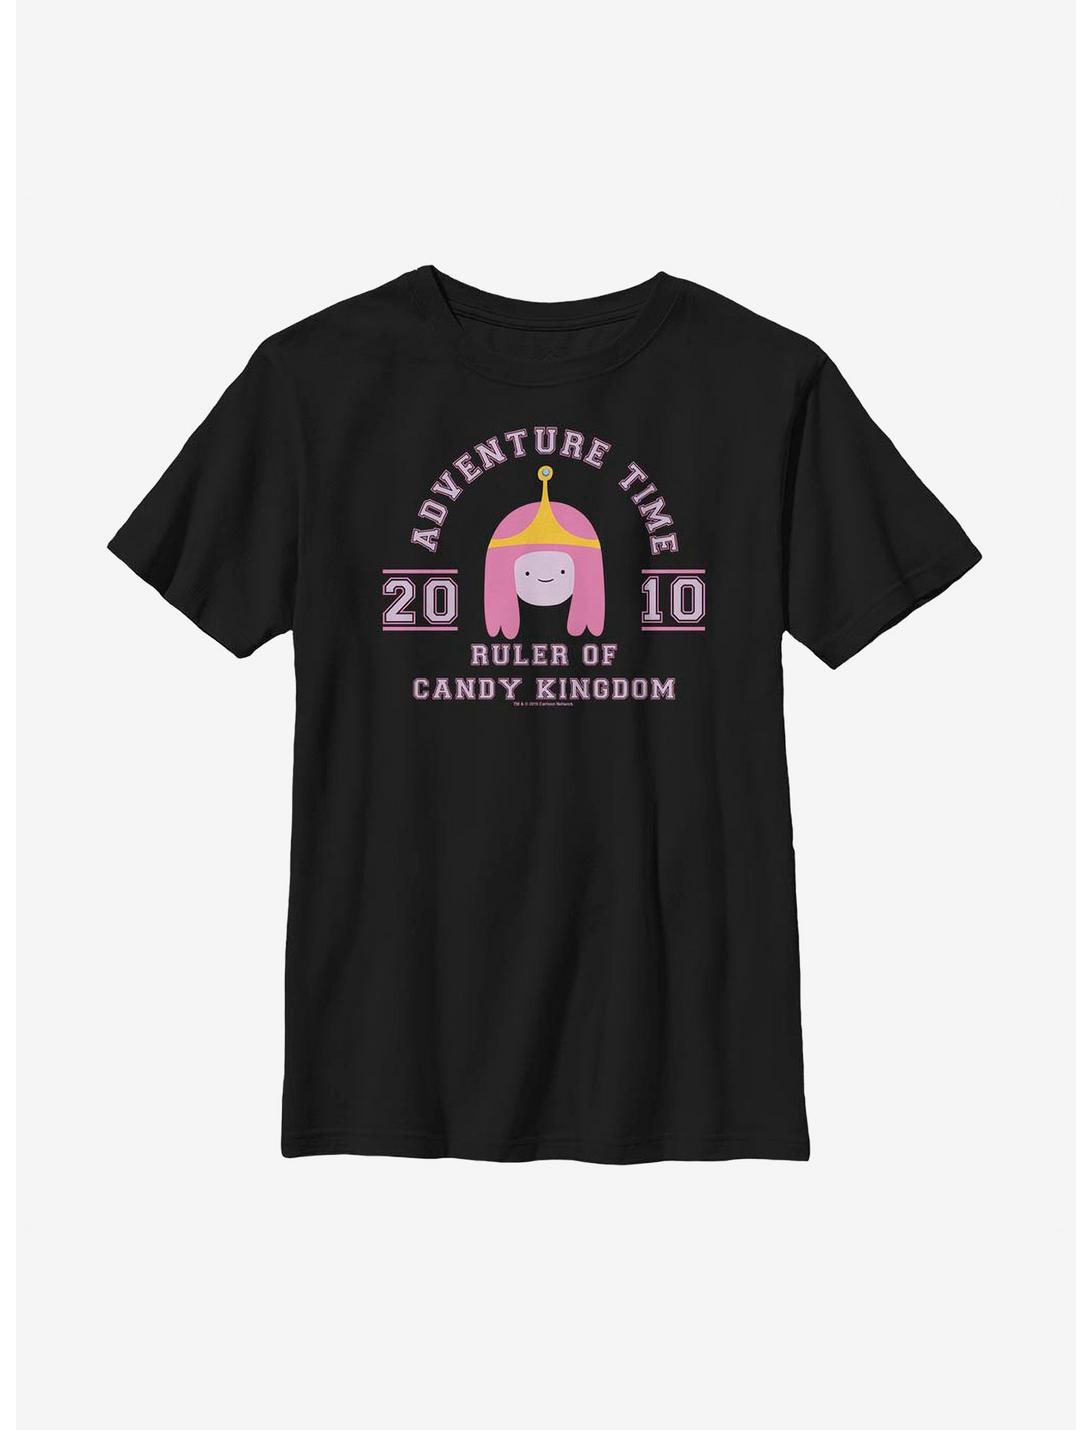 Adventure Time Ruler Of Candy Kingdom 2010 Youth T-Shirt, BLACK, hi-res